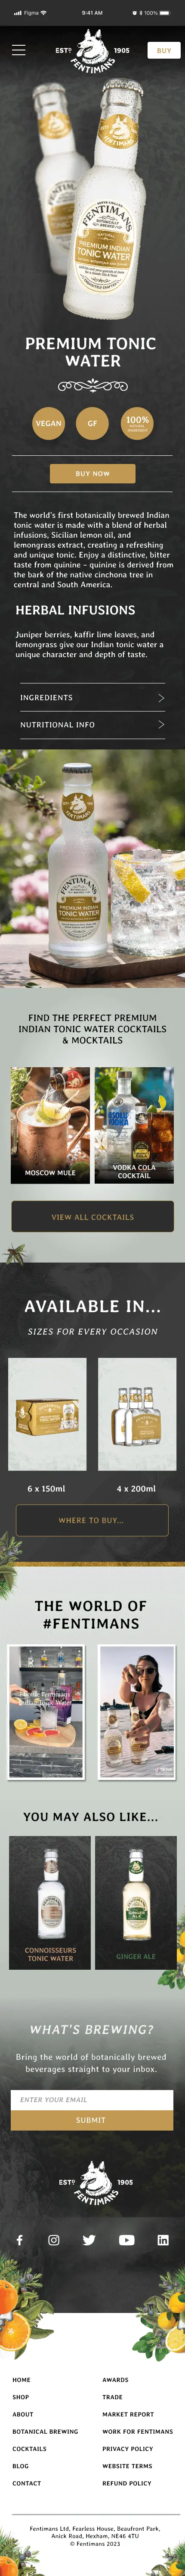 Fentimans product page on a mobile device